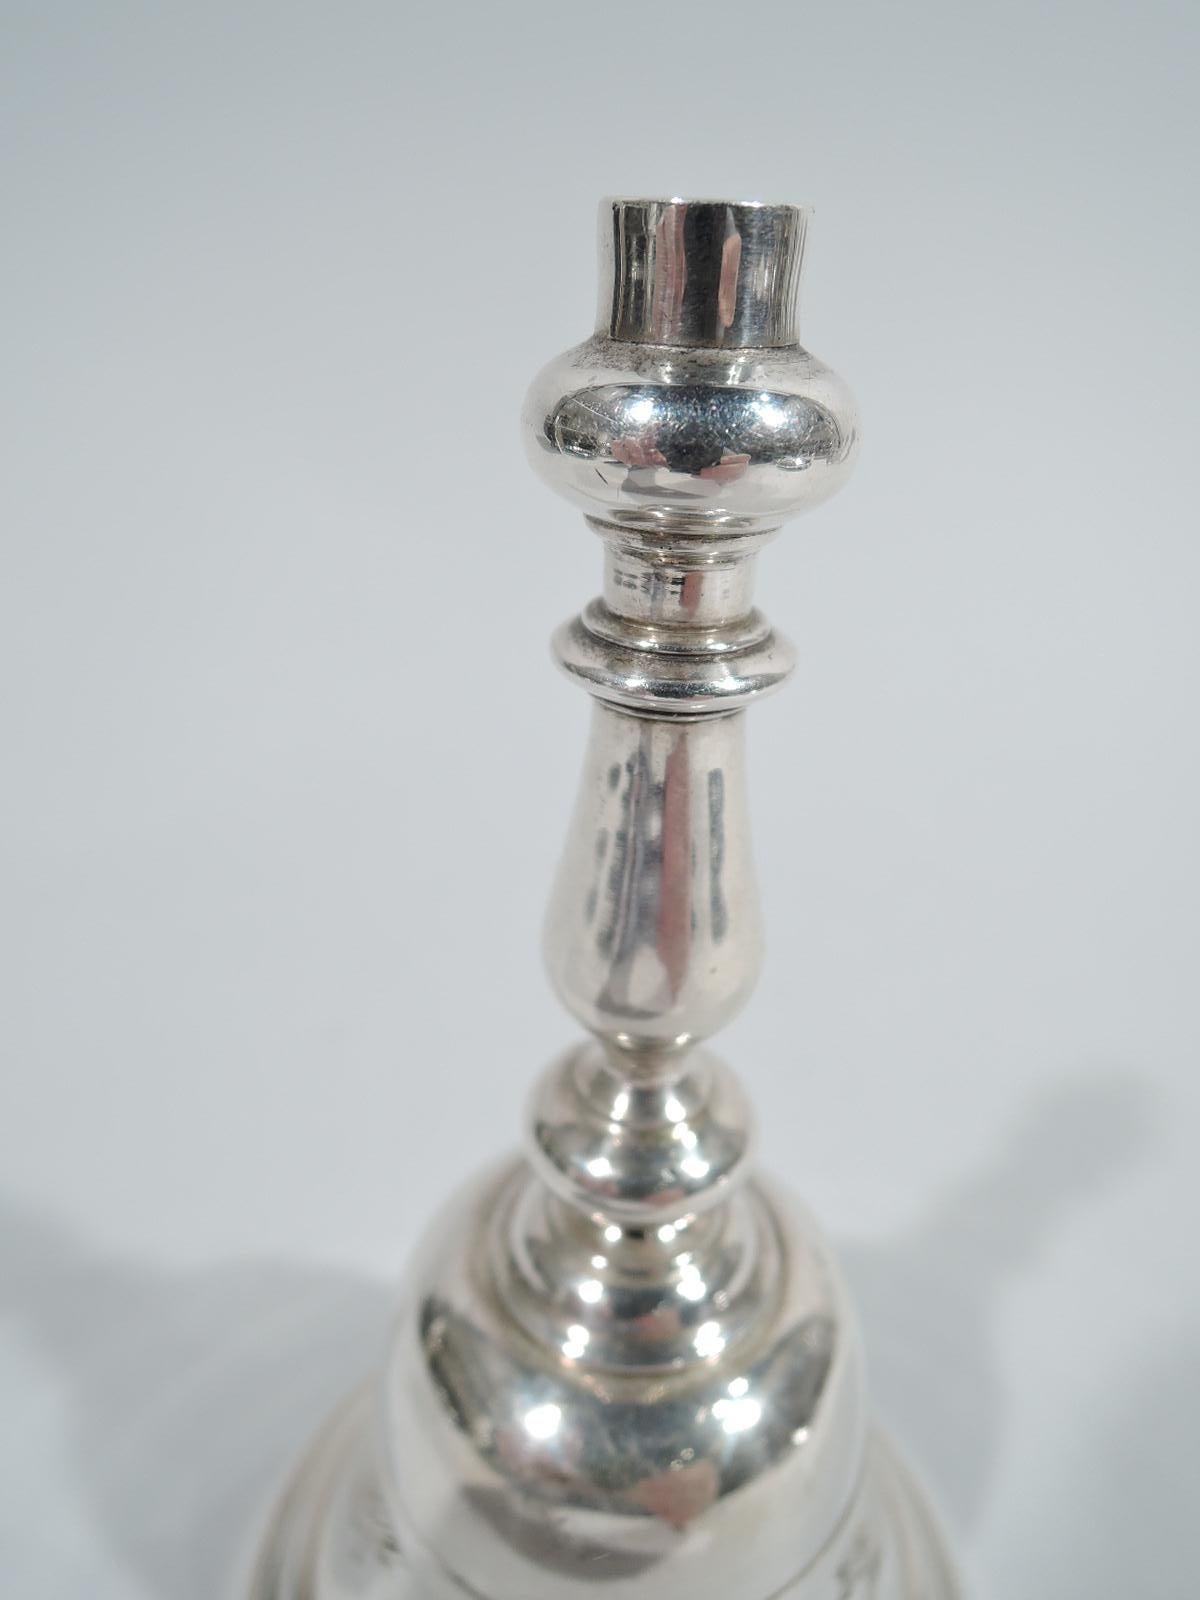 George V sterling silver bell. Made by Charles & Richard Comyns in London in 1925. Stepped and spread bowl and knopped baluster handle. Melodious ting-a-ling. Fully marked. Heavy weight: 12 troy ounces.